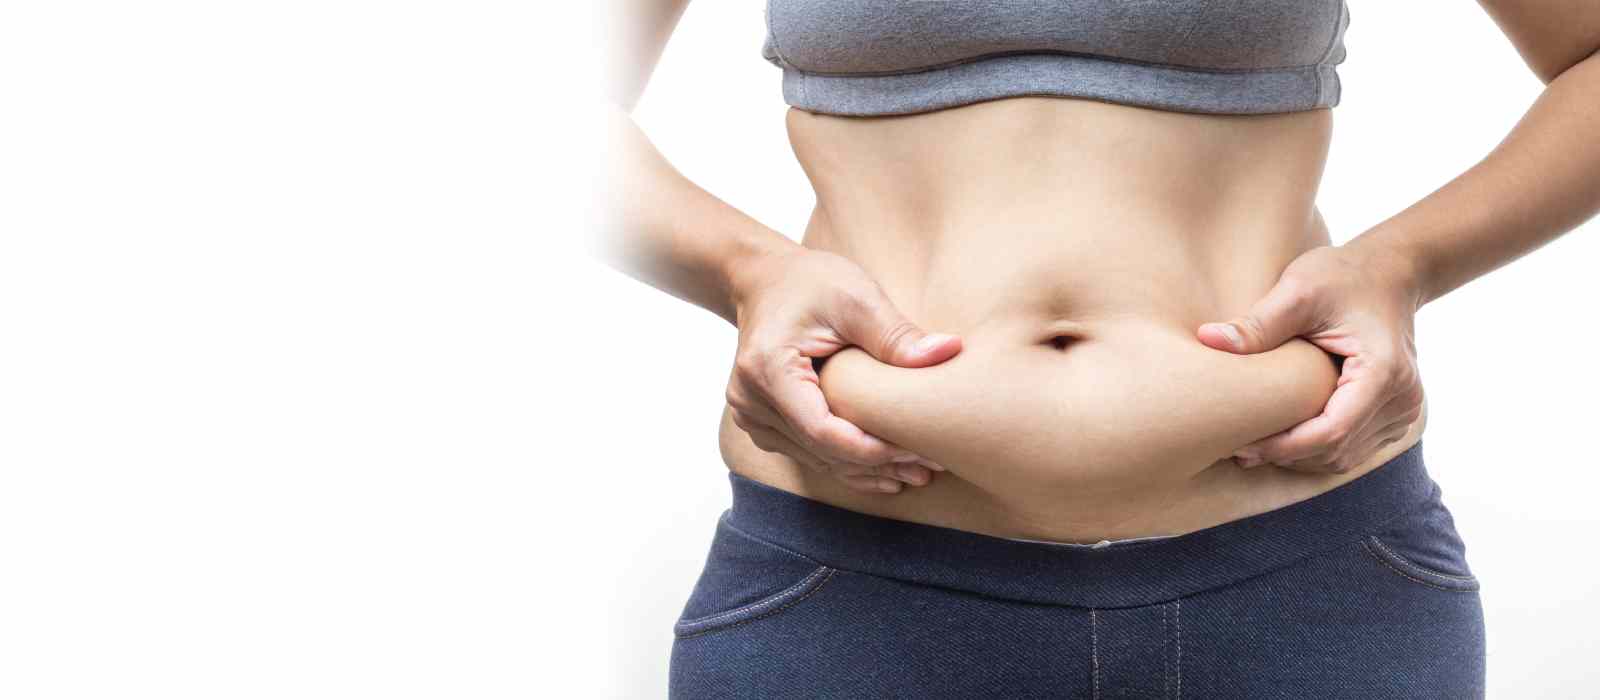 Tummy Tuck by Best Plastic Surgeon in Hyderabad & India